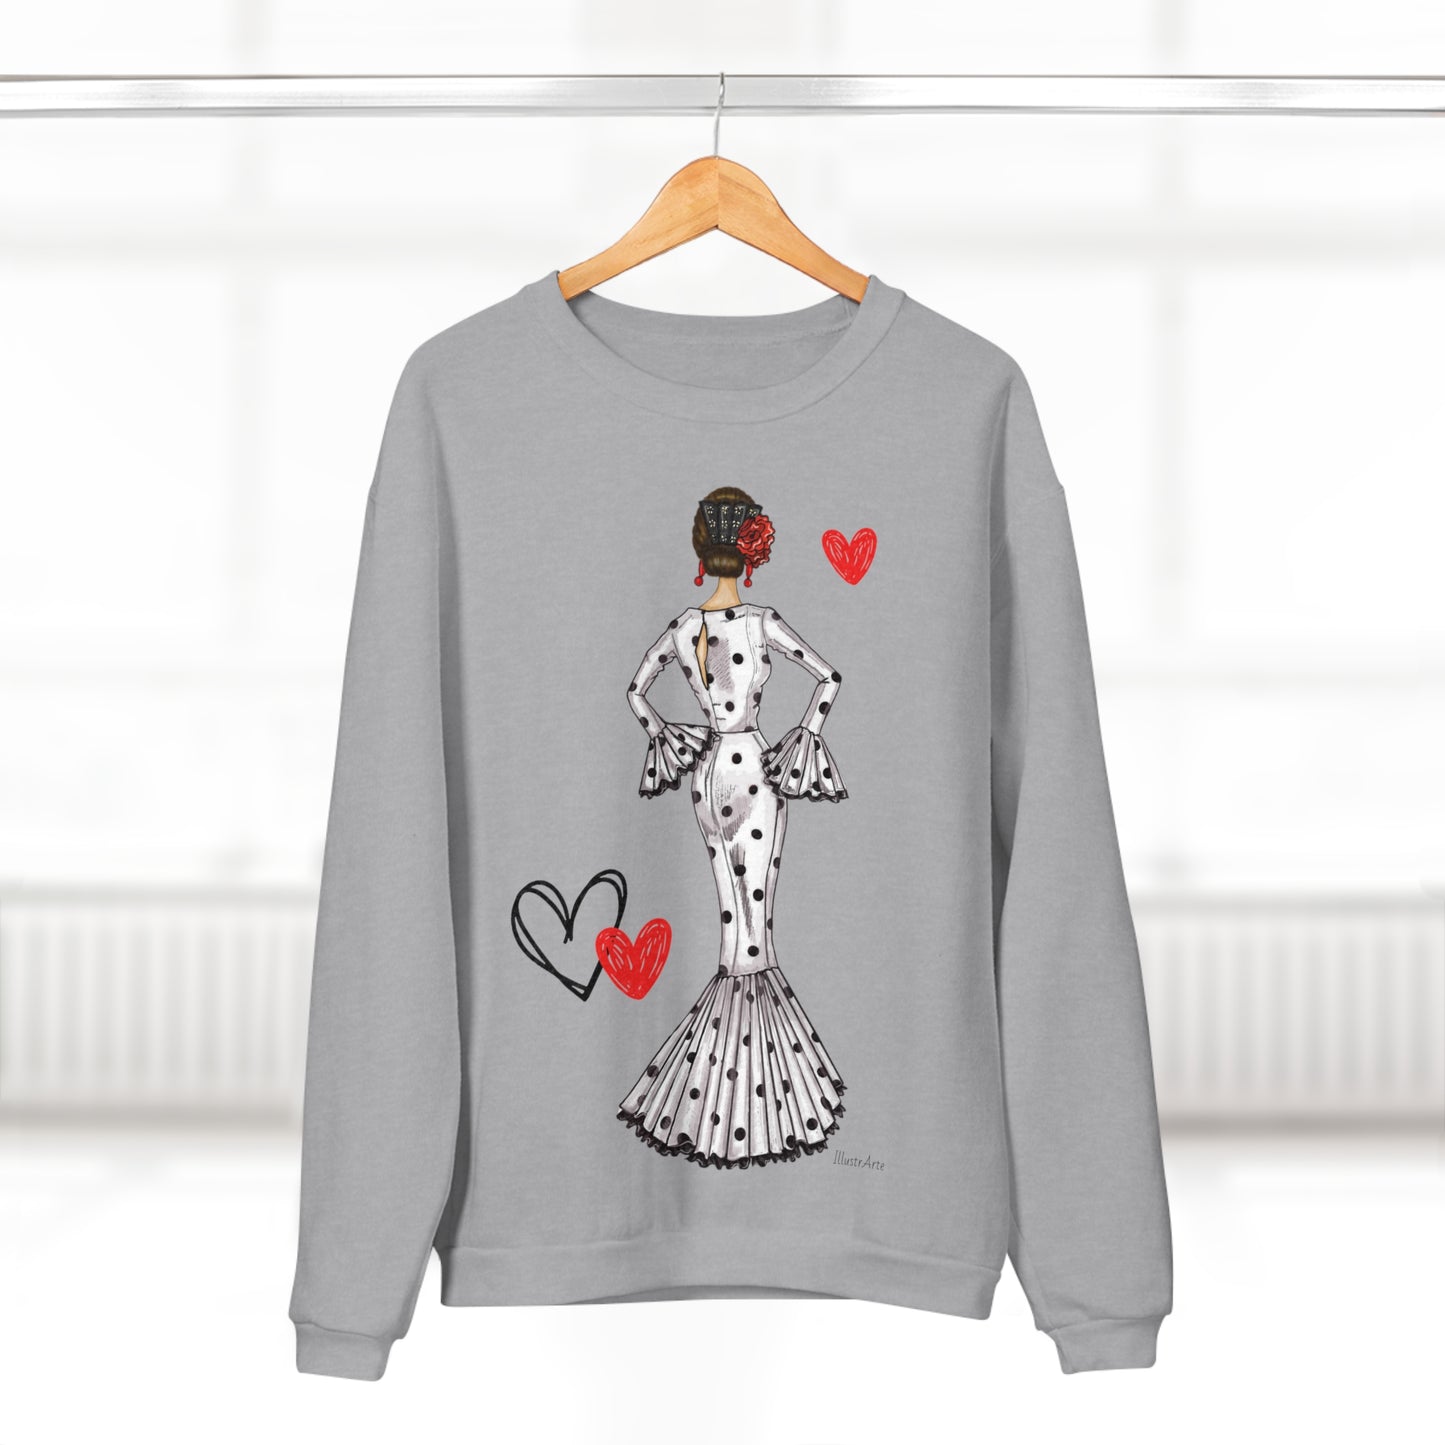 a sweater with a woman in a dress and hearts on it